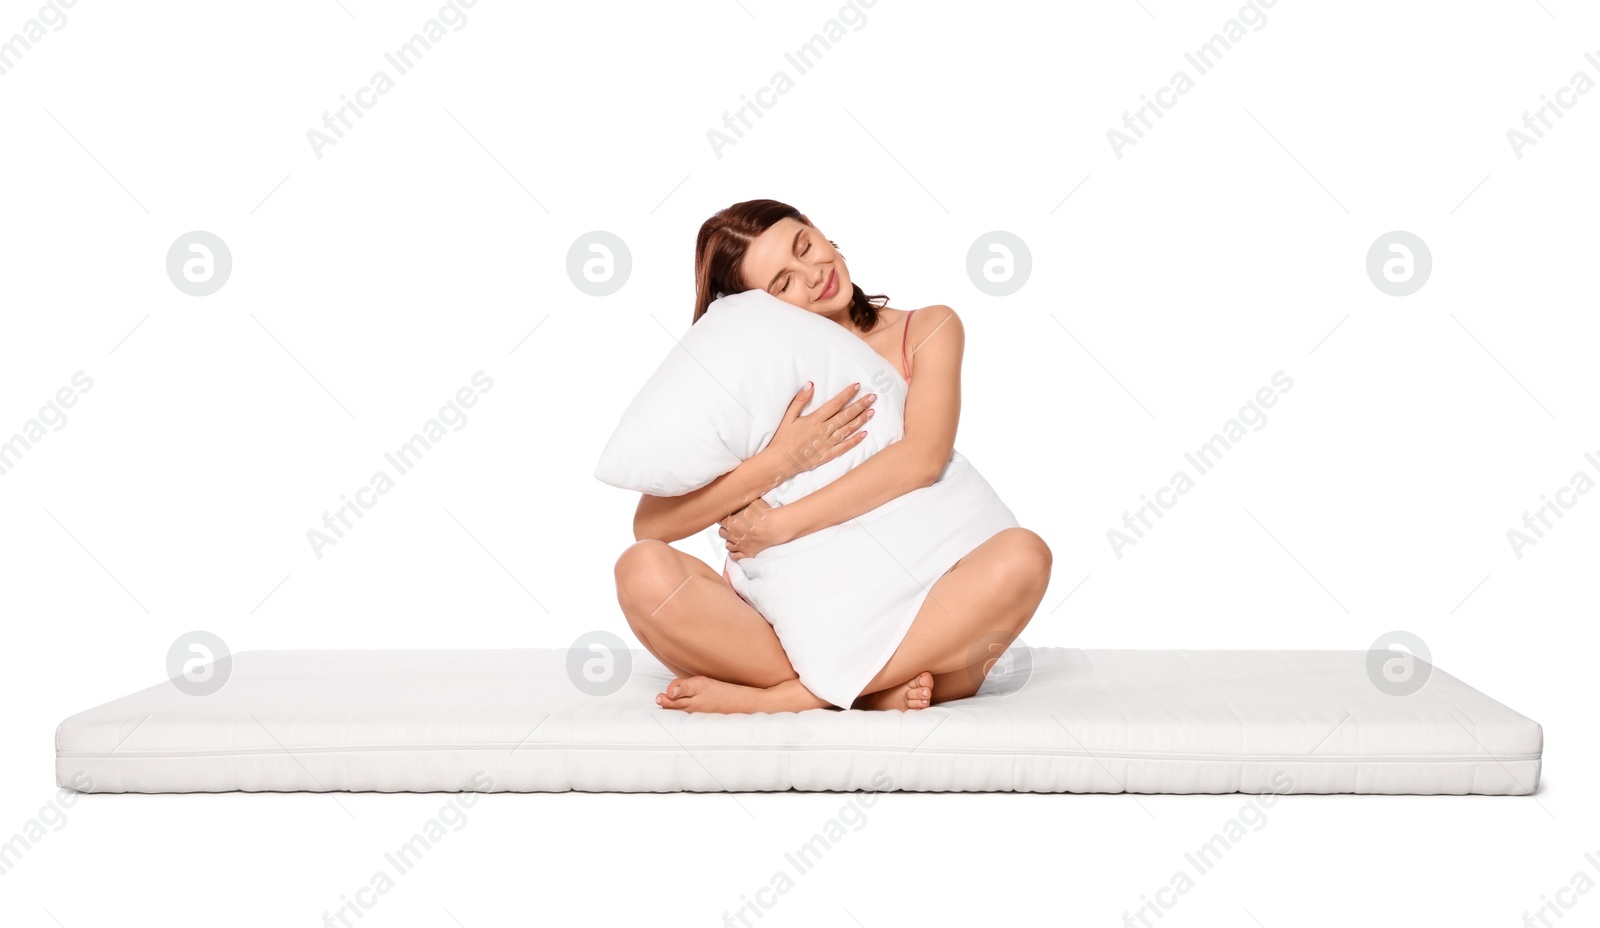 Photo of Young woman on soft mattress holding pillow against white background